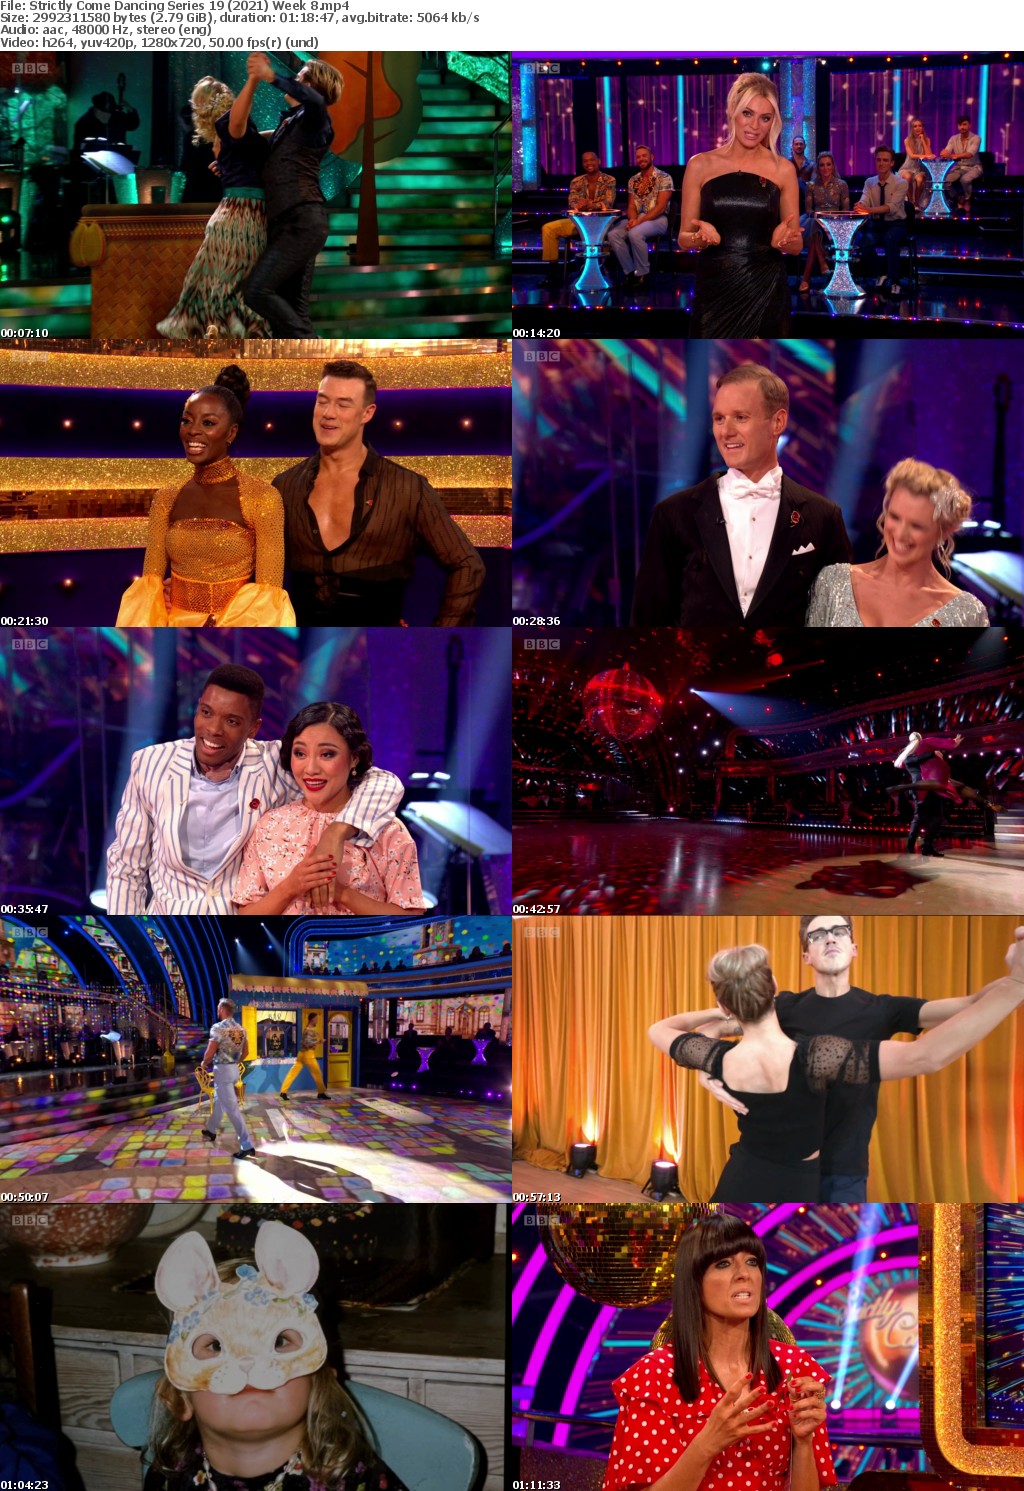 Strictly Come Dancing Series 19 (2021) Week 8 (1280x720p HD, 50fps, soft Eng subs)